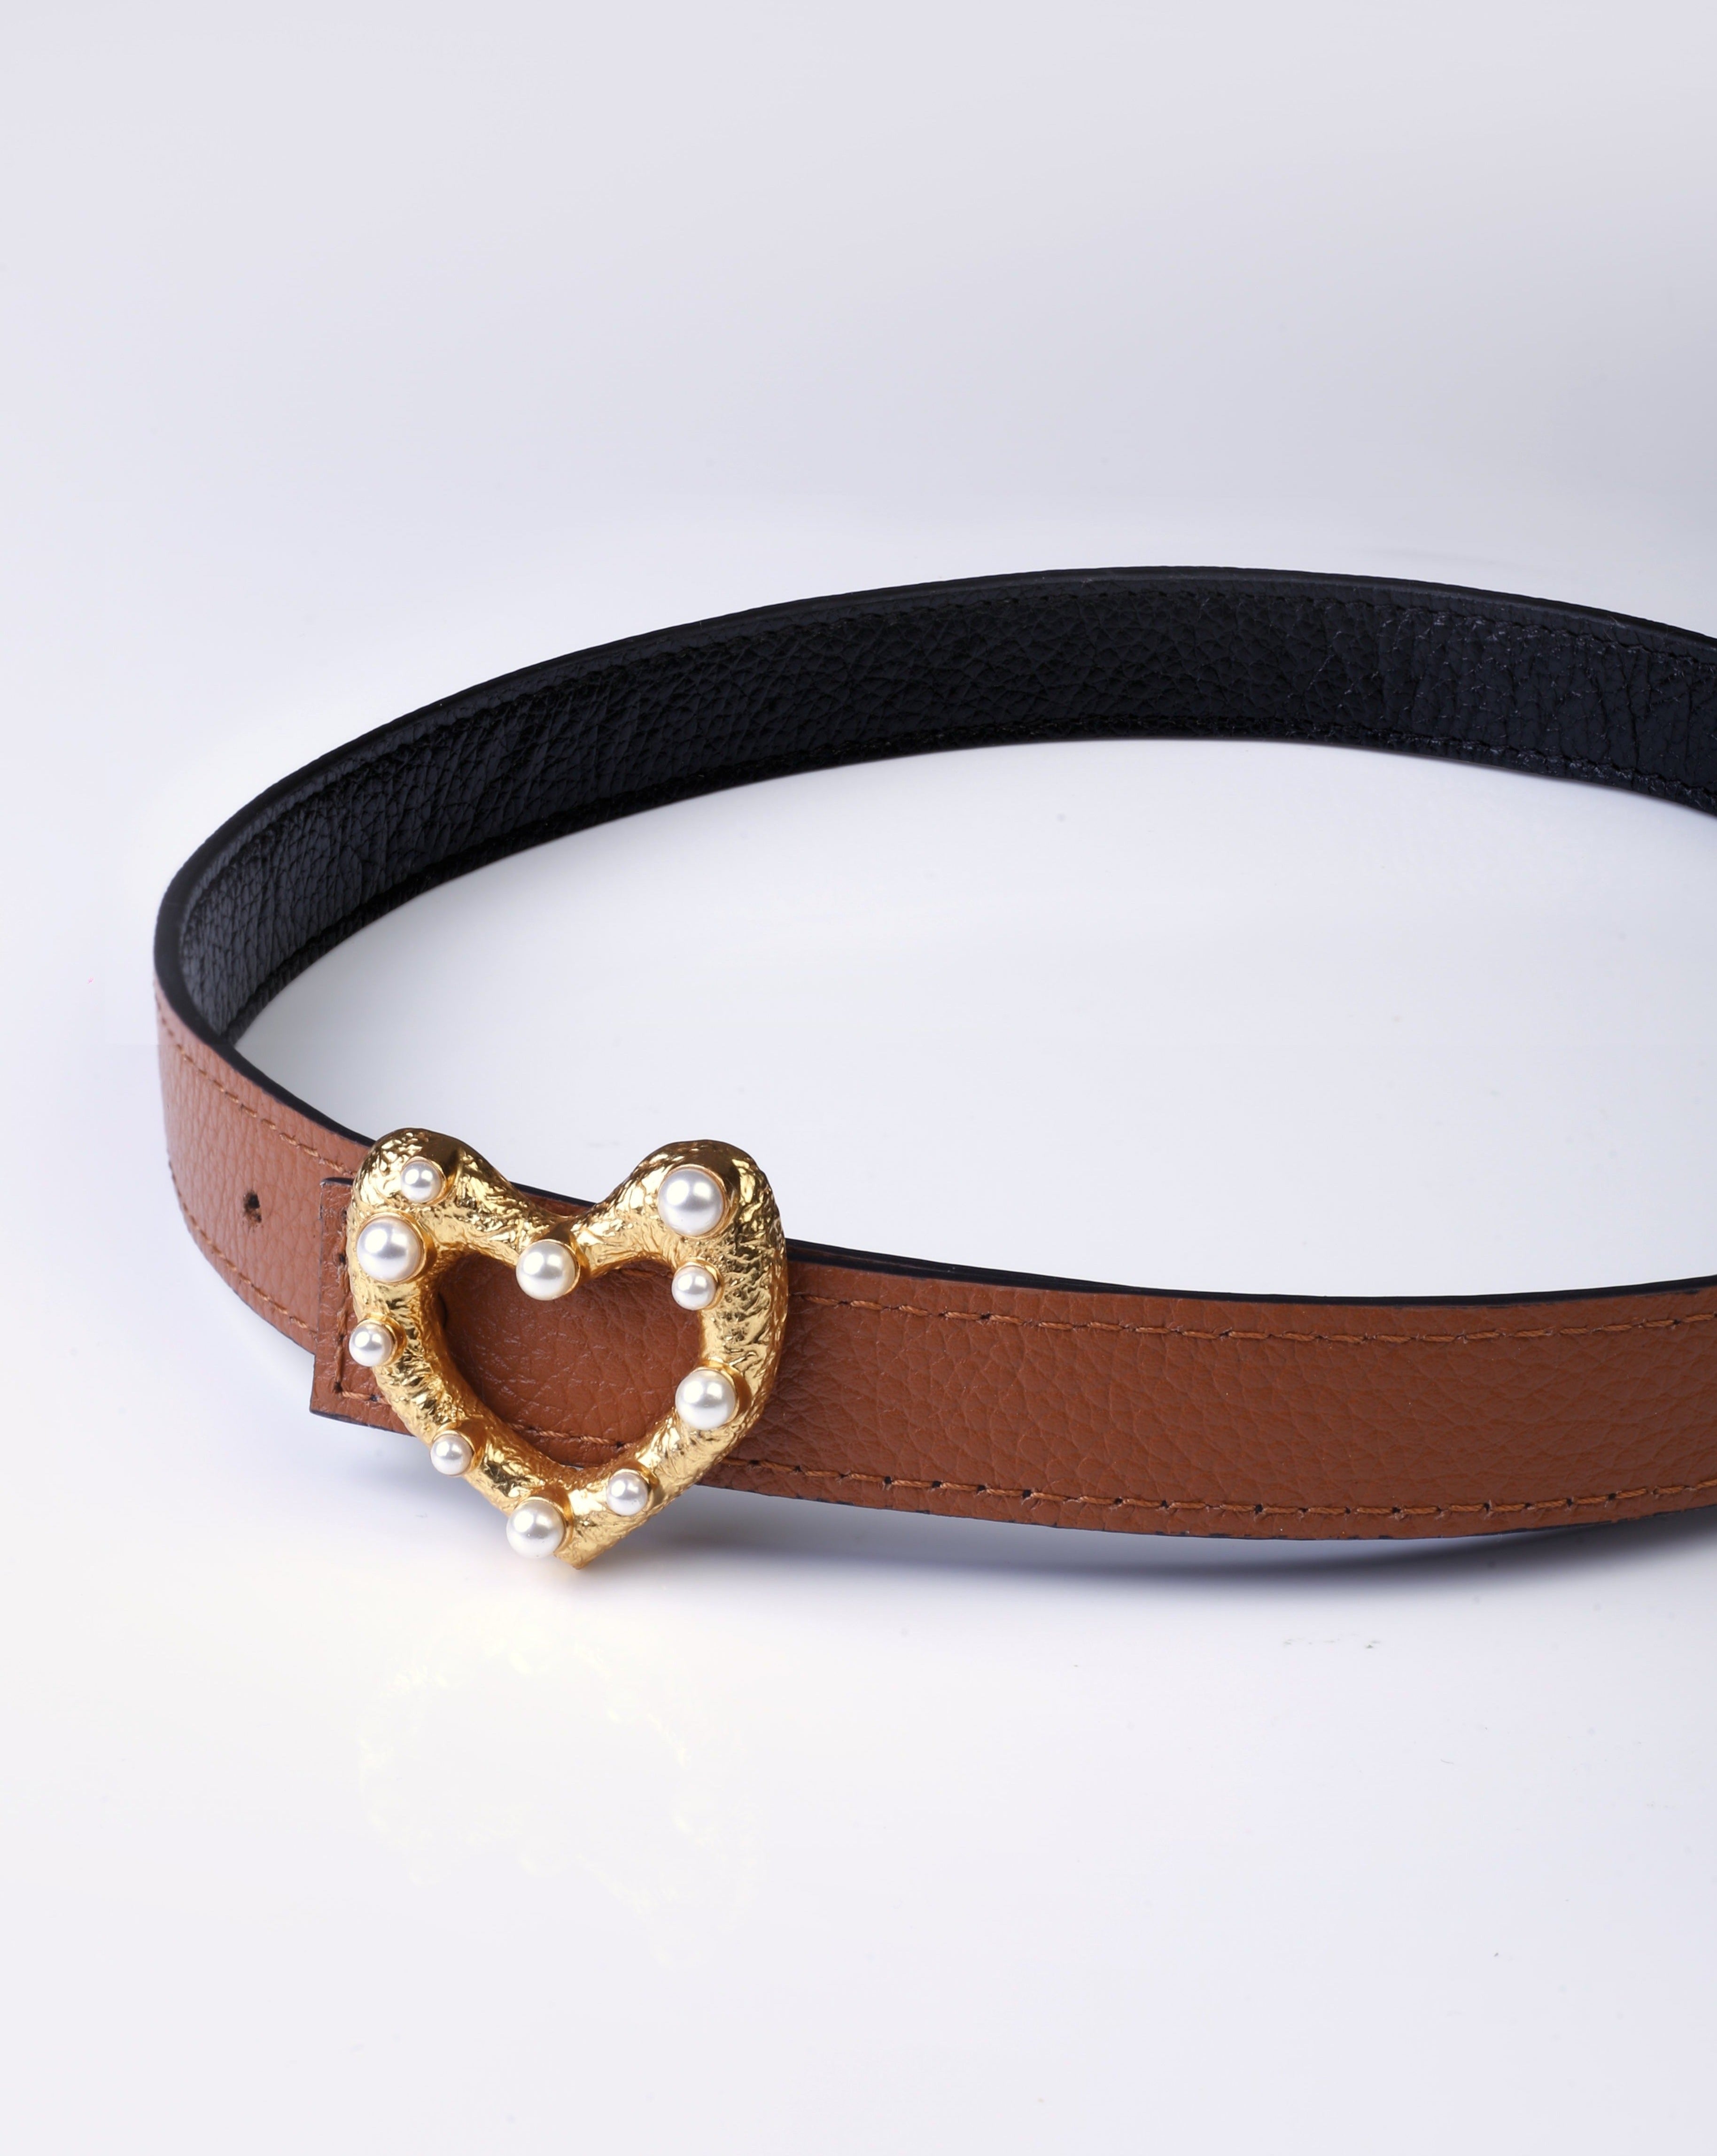 Reversible Thin Belt With Gold Heart Buckle